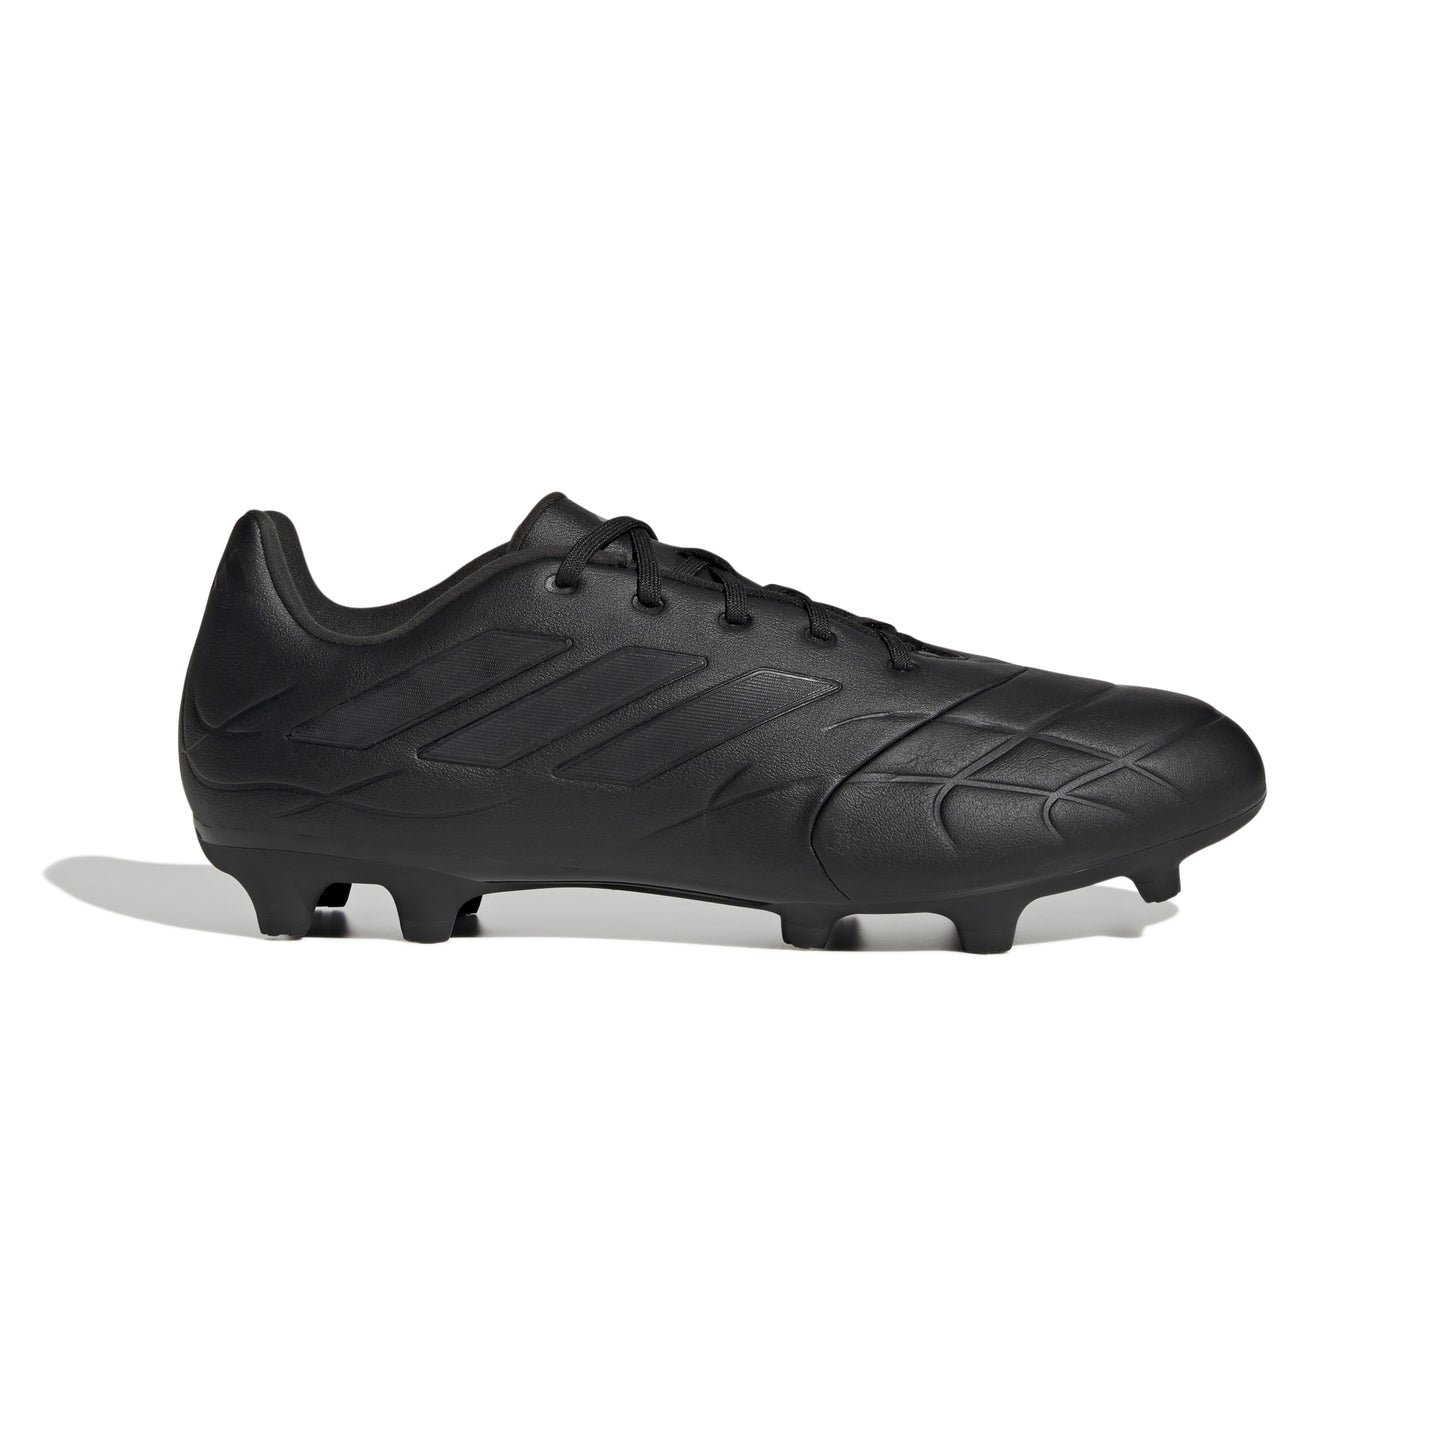 adidas Copa Pure.3 FG Black Soccer Cleats Leather